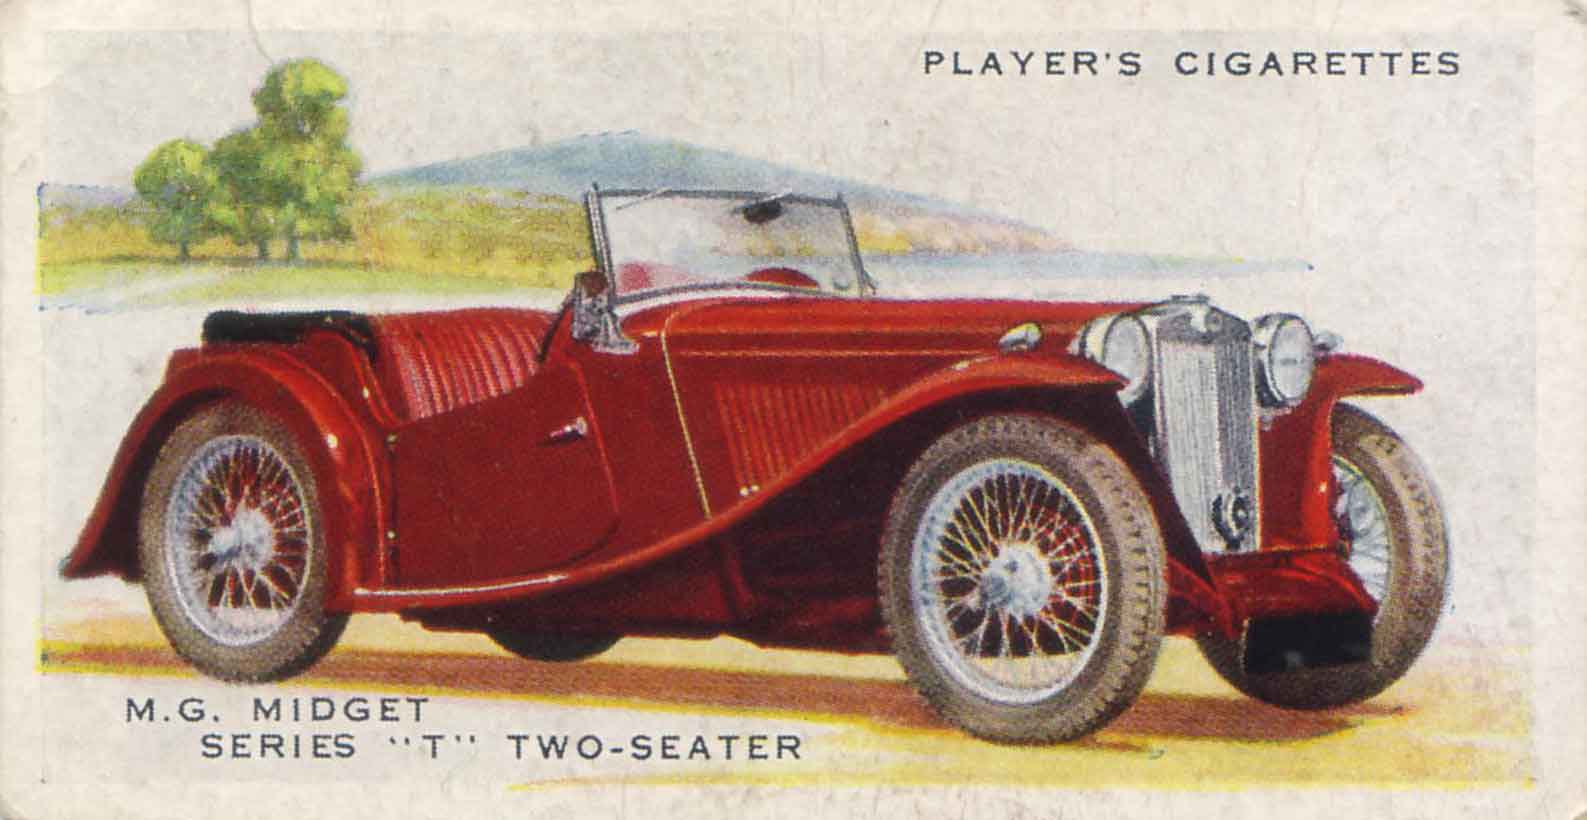 M.G. Midget "T" Two-Seater. 1937 cigarette card.